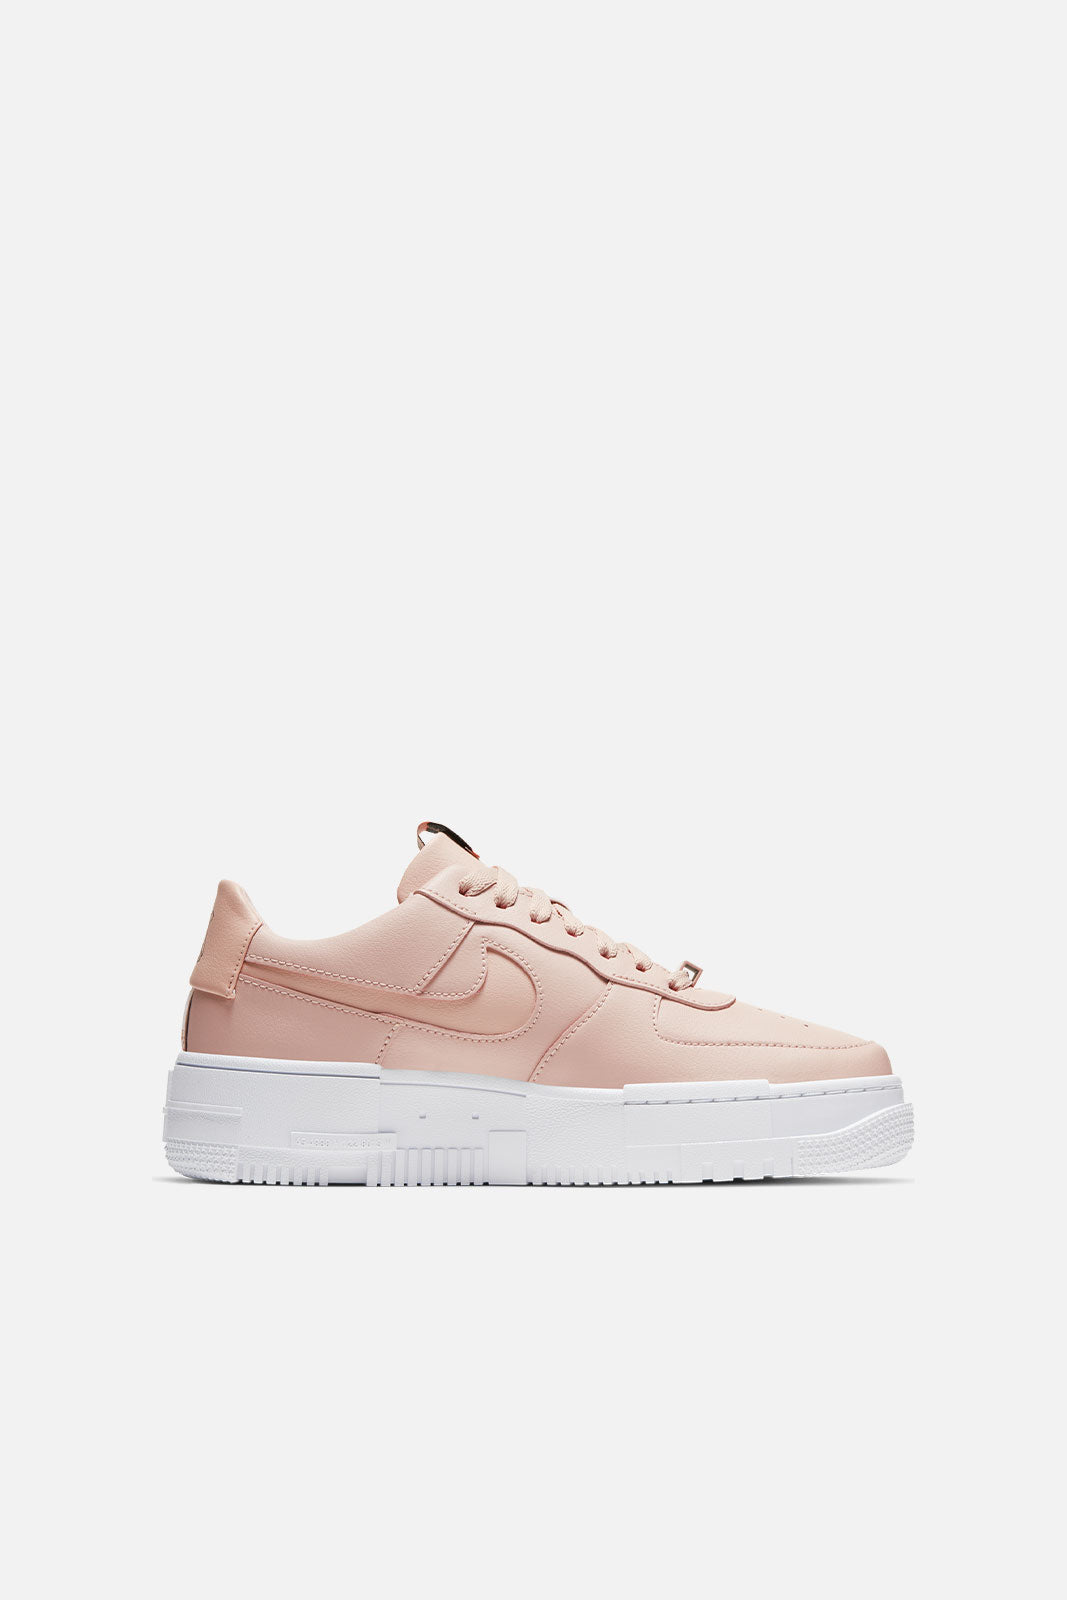 nike air force sole height